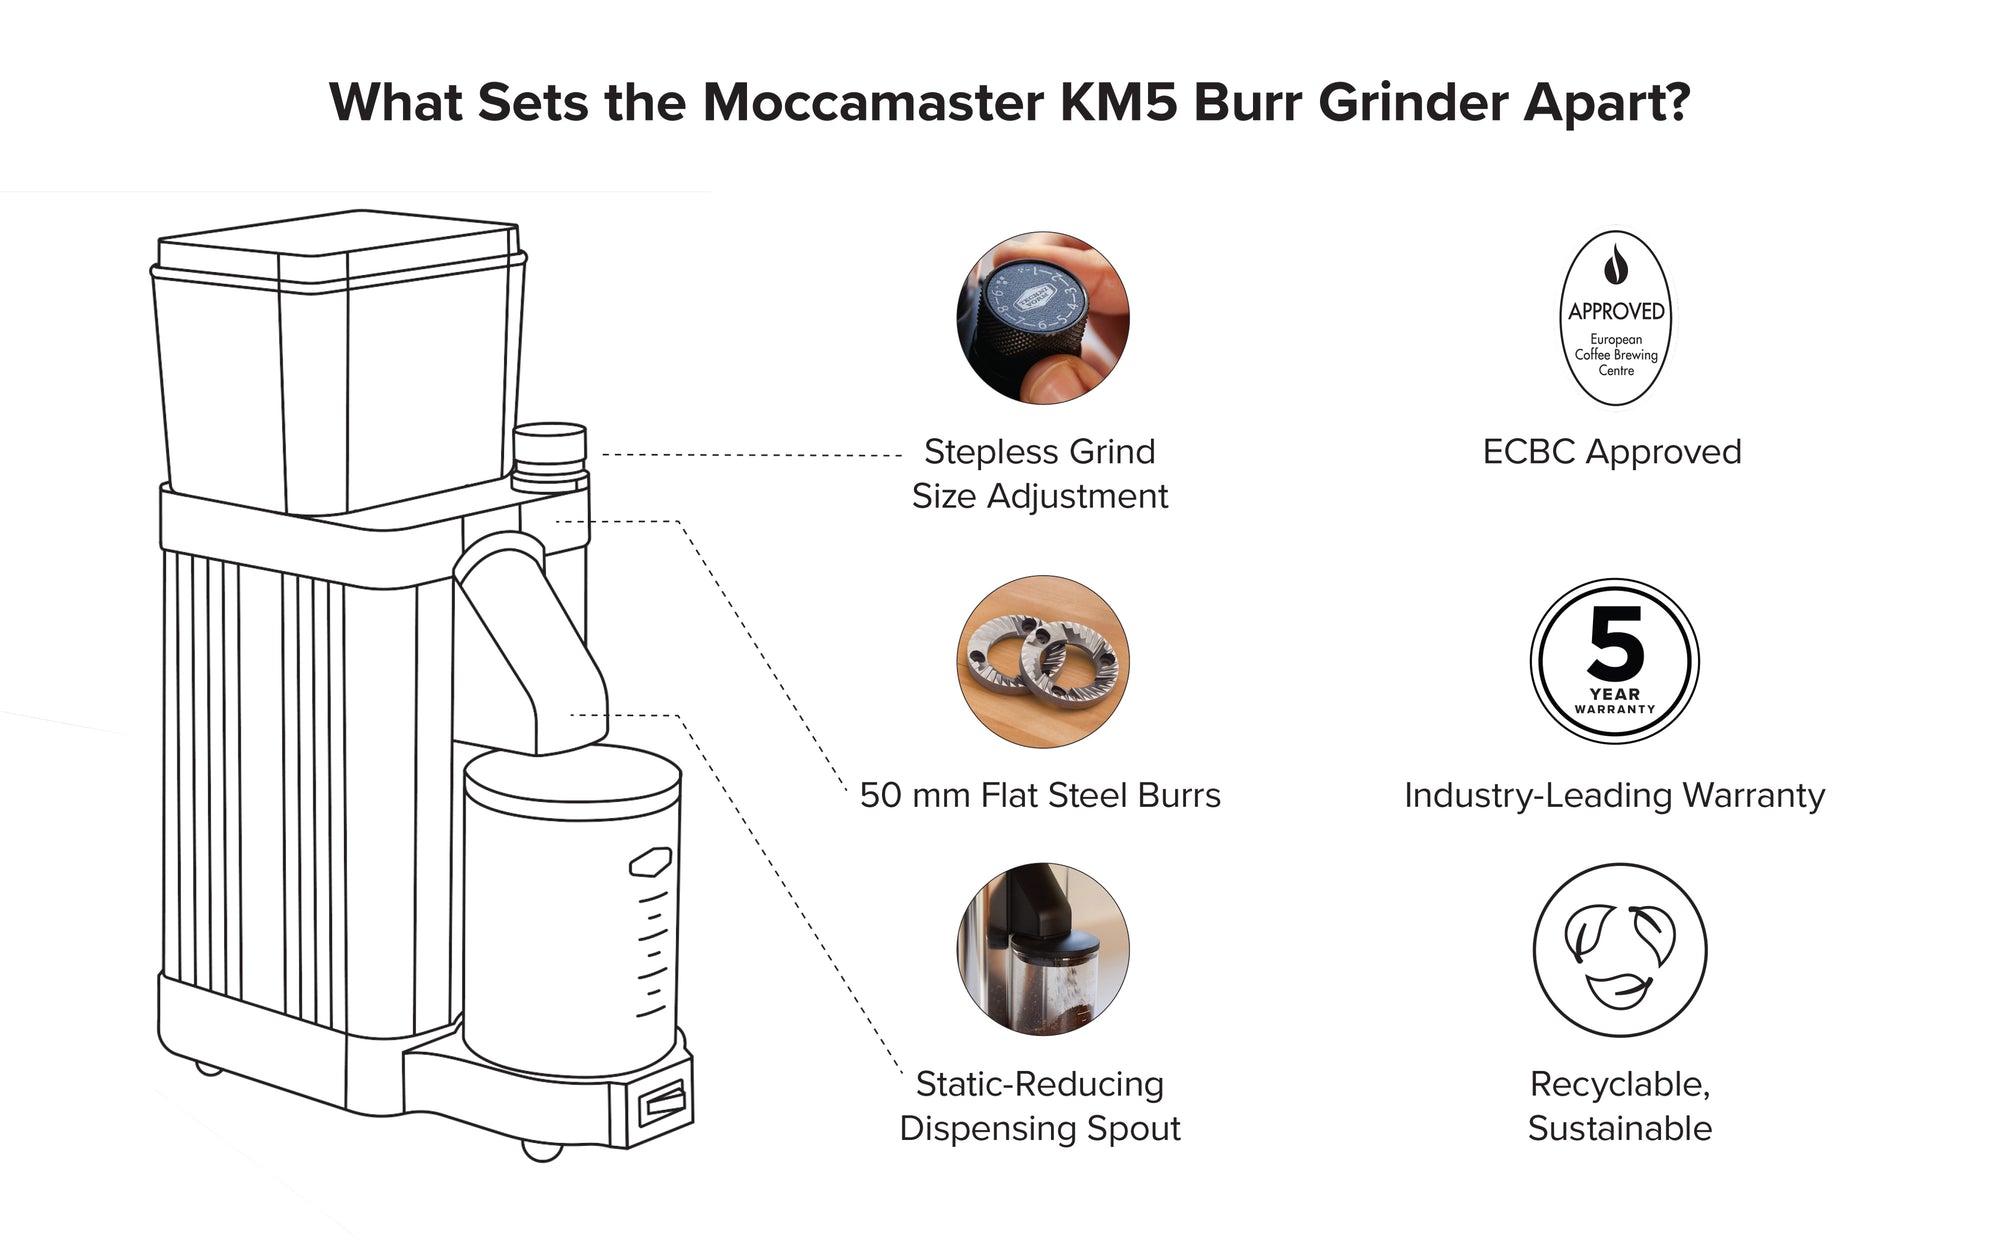 Coffee Grinders: Introducing the KM5 Burr Grinder - Moccamaster USA